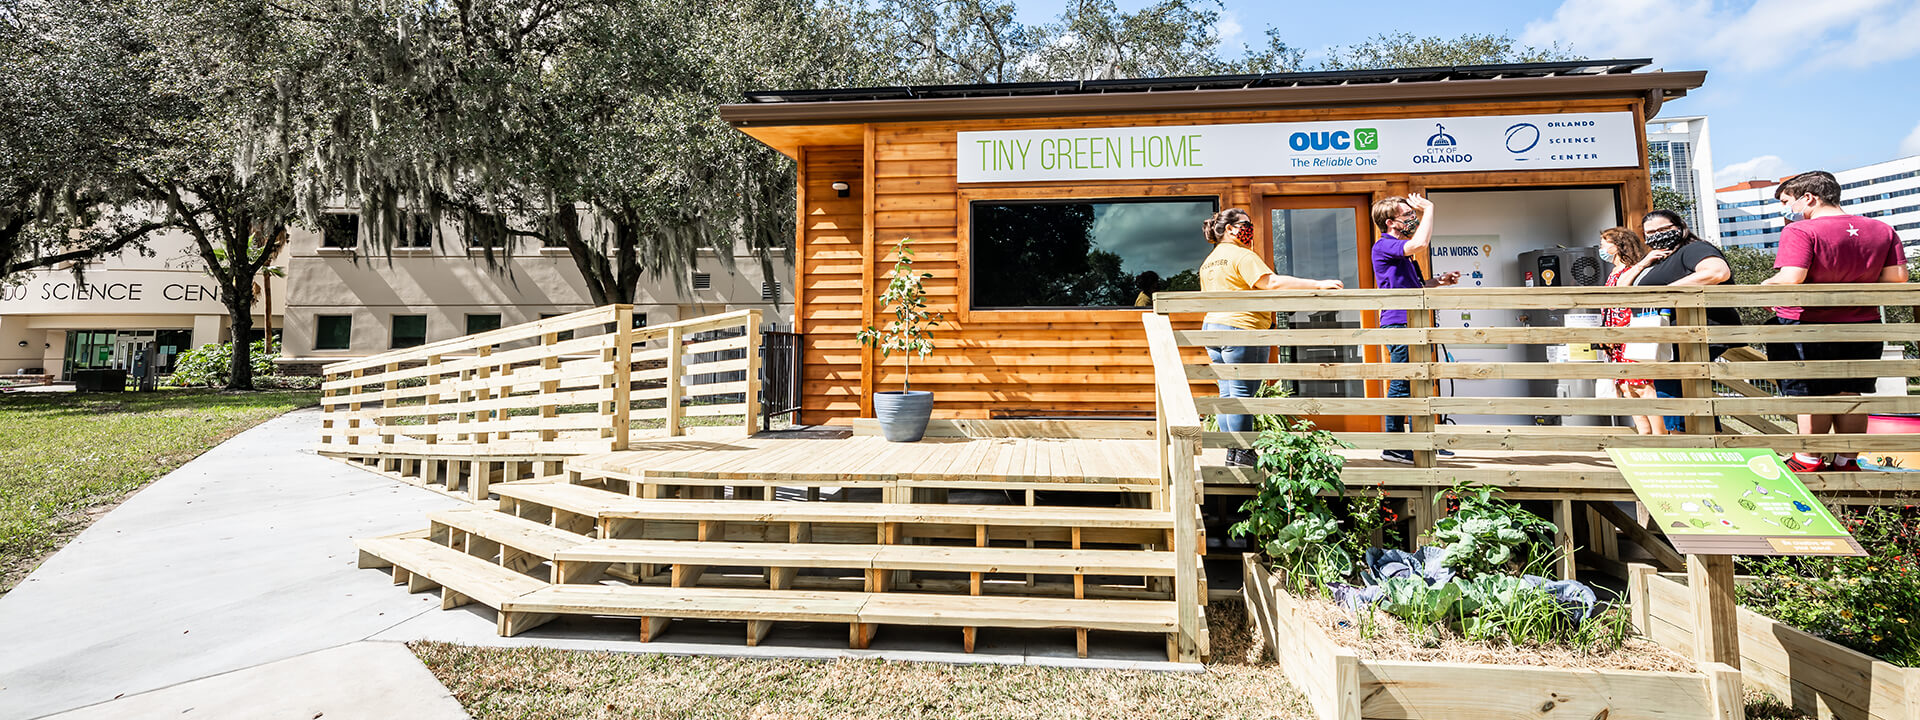 Guests touring a Tiny Green Home at Orlando Science Center